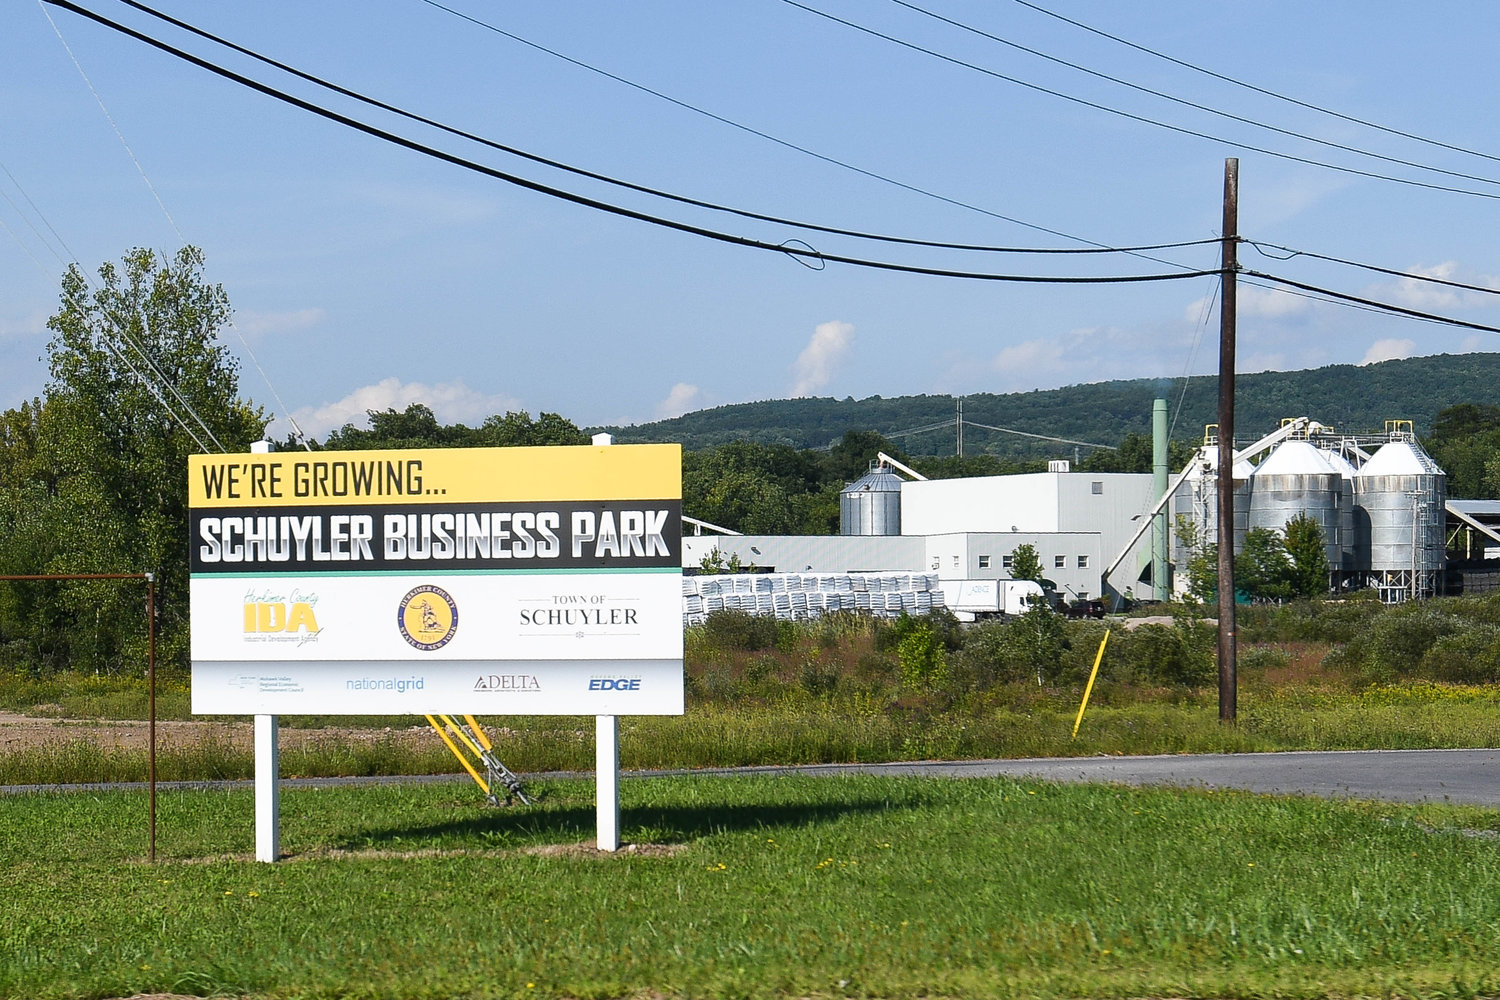 Home Depot will build a distribution center in the Schuyler Business Park. The site work is expected to begin this fall and construction is set to commence in the spring of 2023.